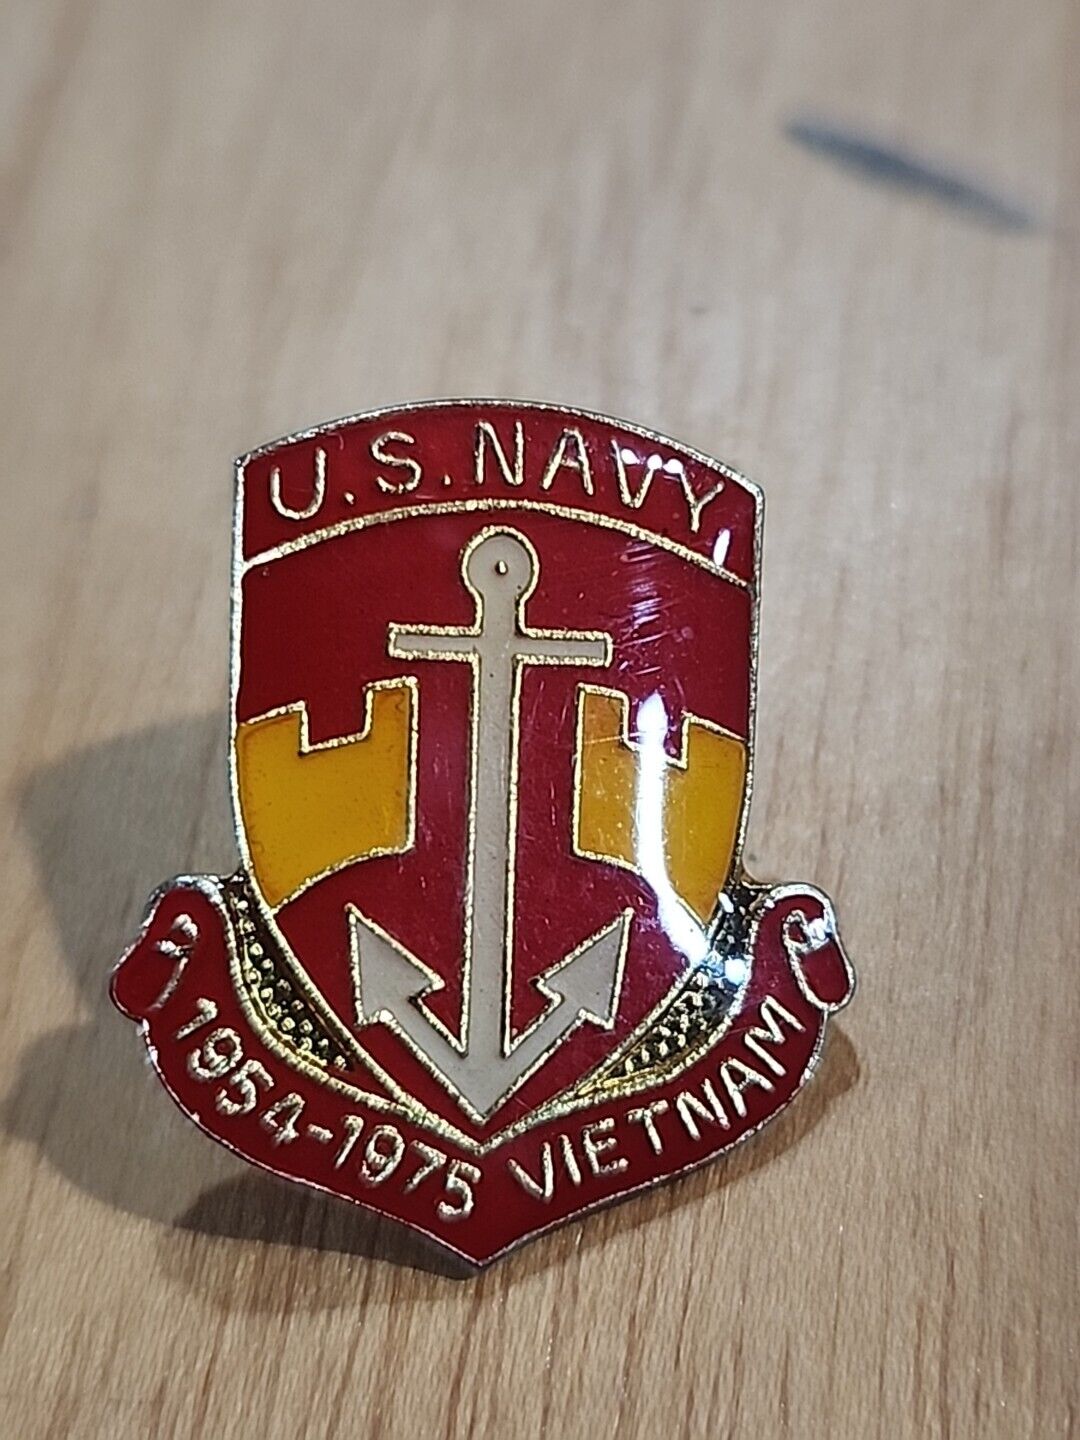 Vintage U.S. NAVY 1954-1975 VIETNAM Lapel Pin - Height is about 1954 -1975